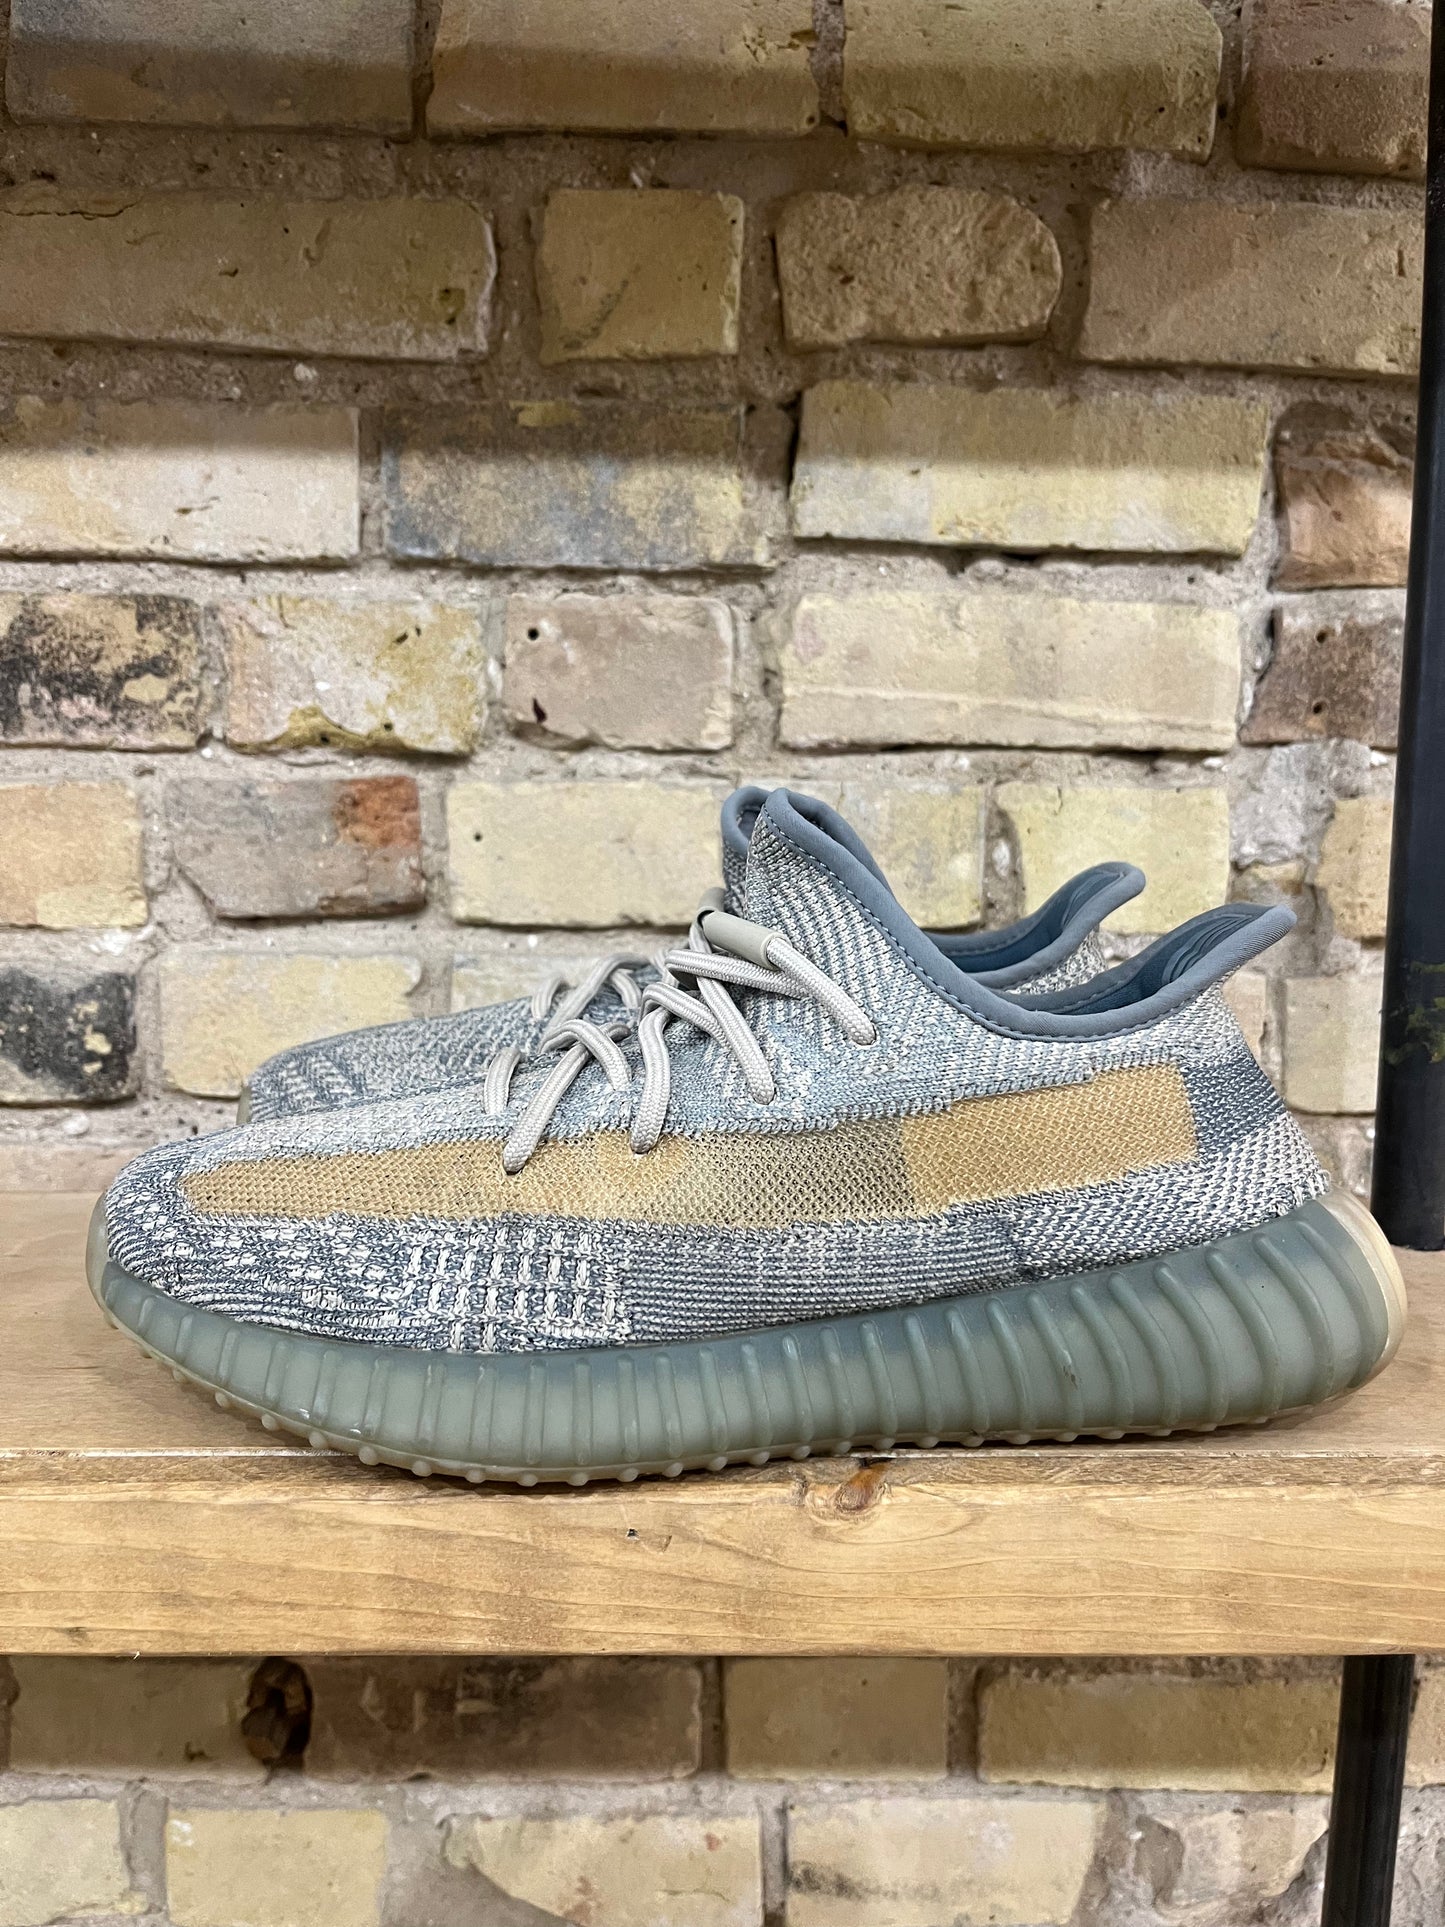 Yeezy 350 Ash Blue Size 8.5 (MKE) (Trusted Club)